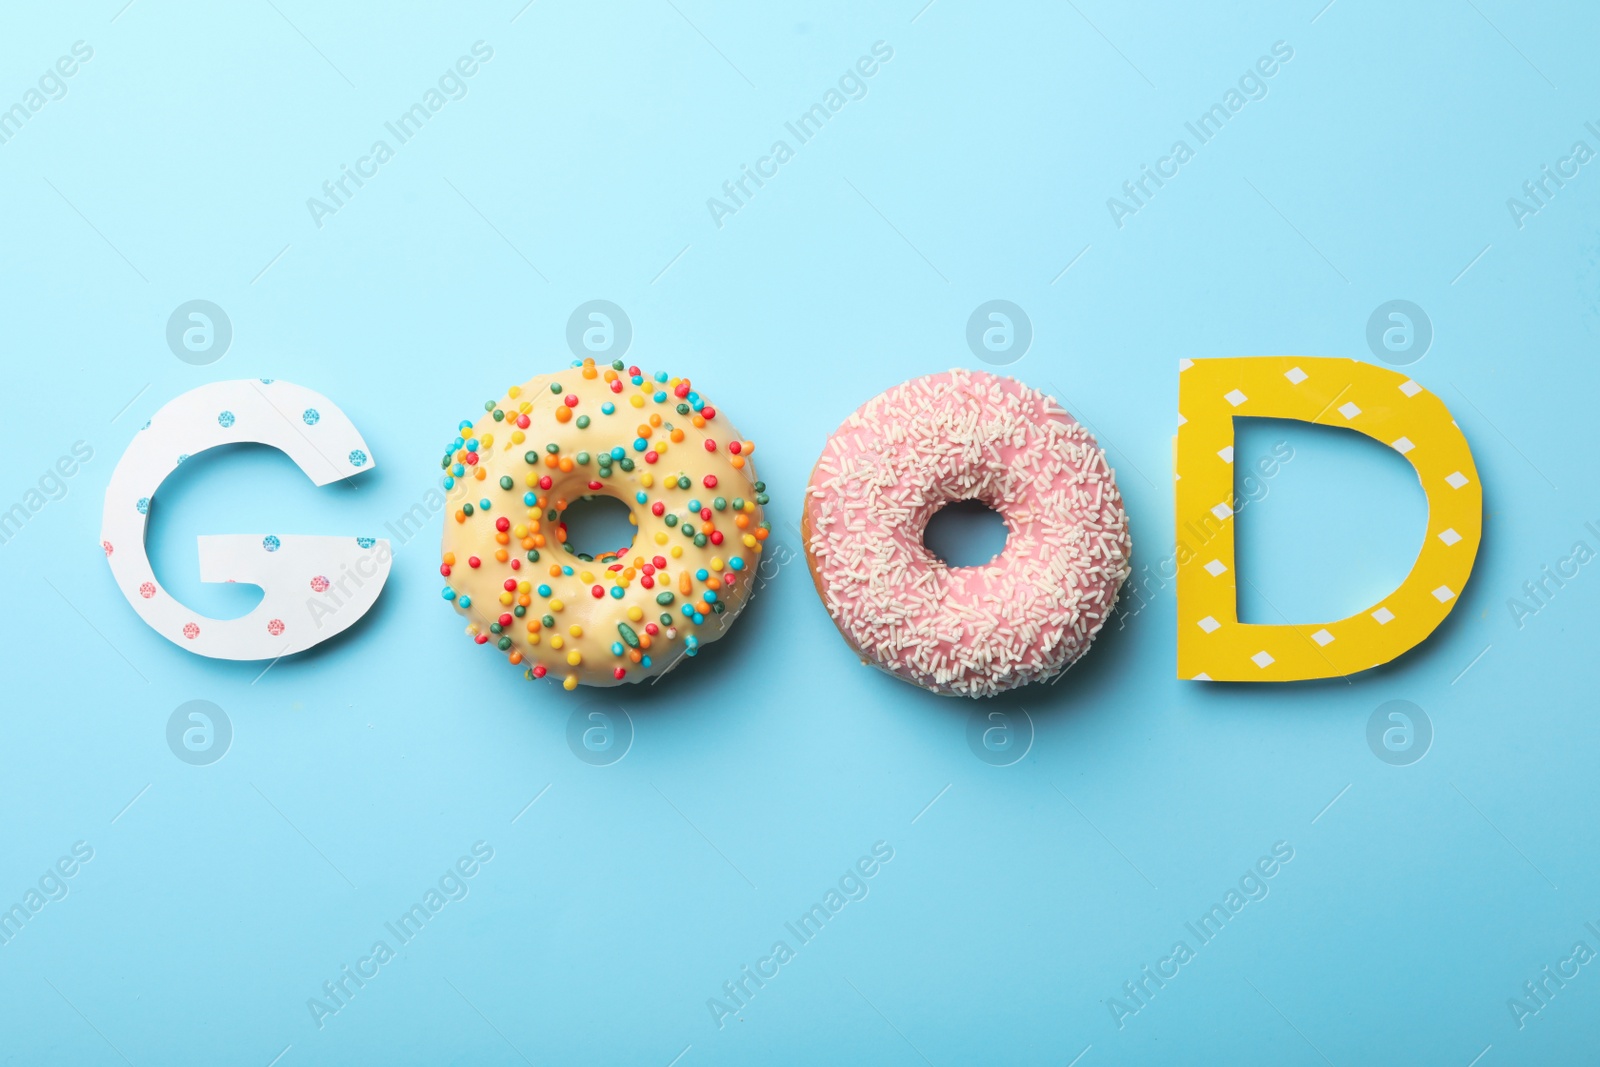 Photo of Word GOOD made with donuts and carton letters on light blue background, flat lay